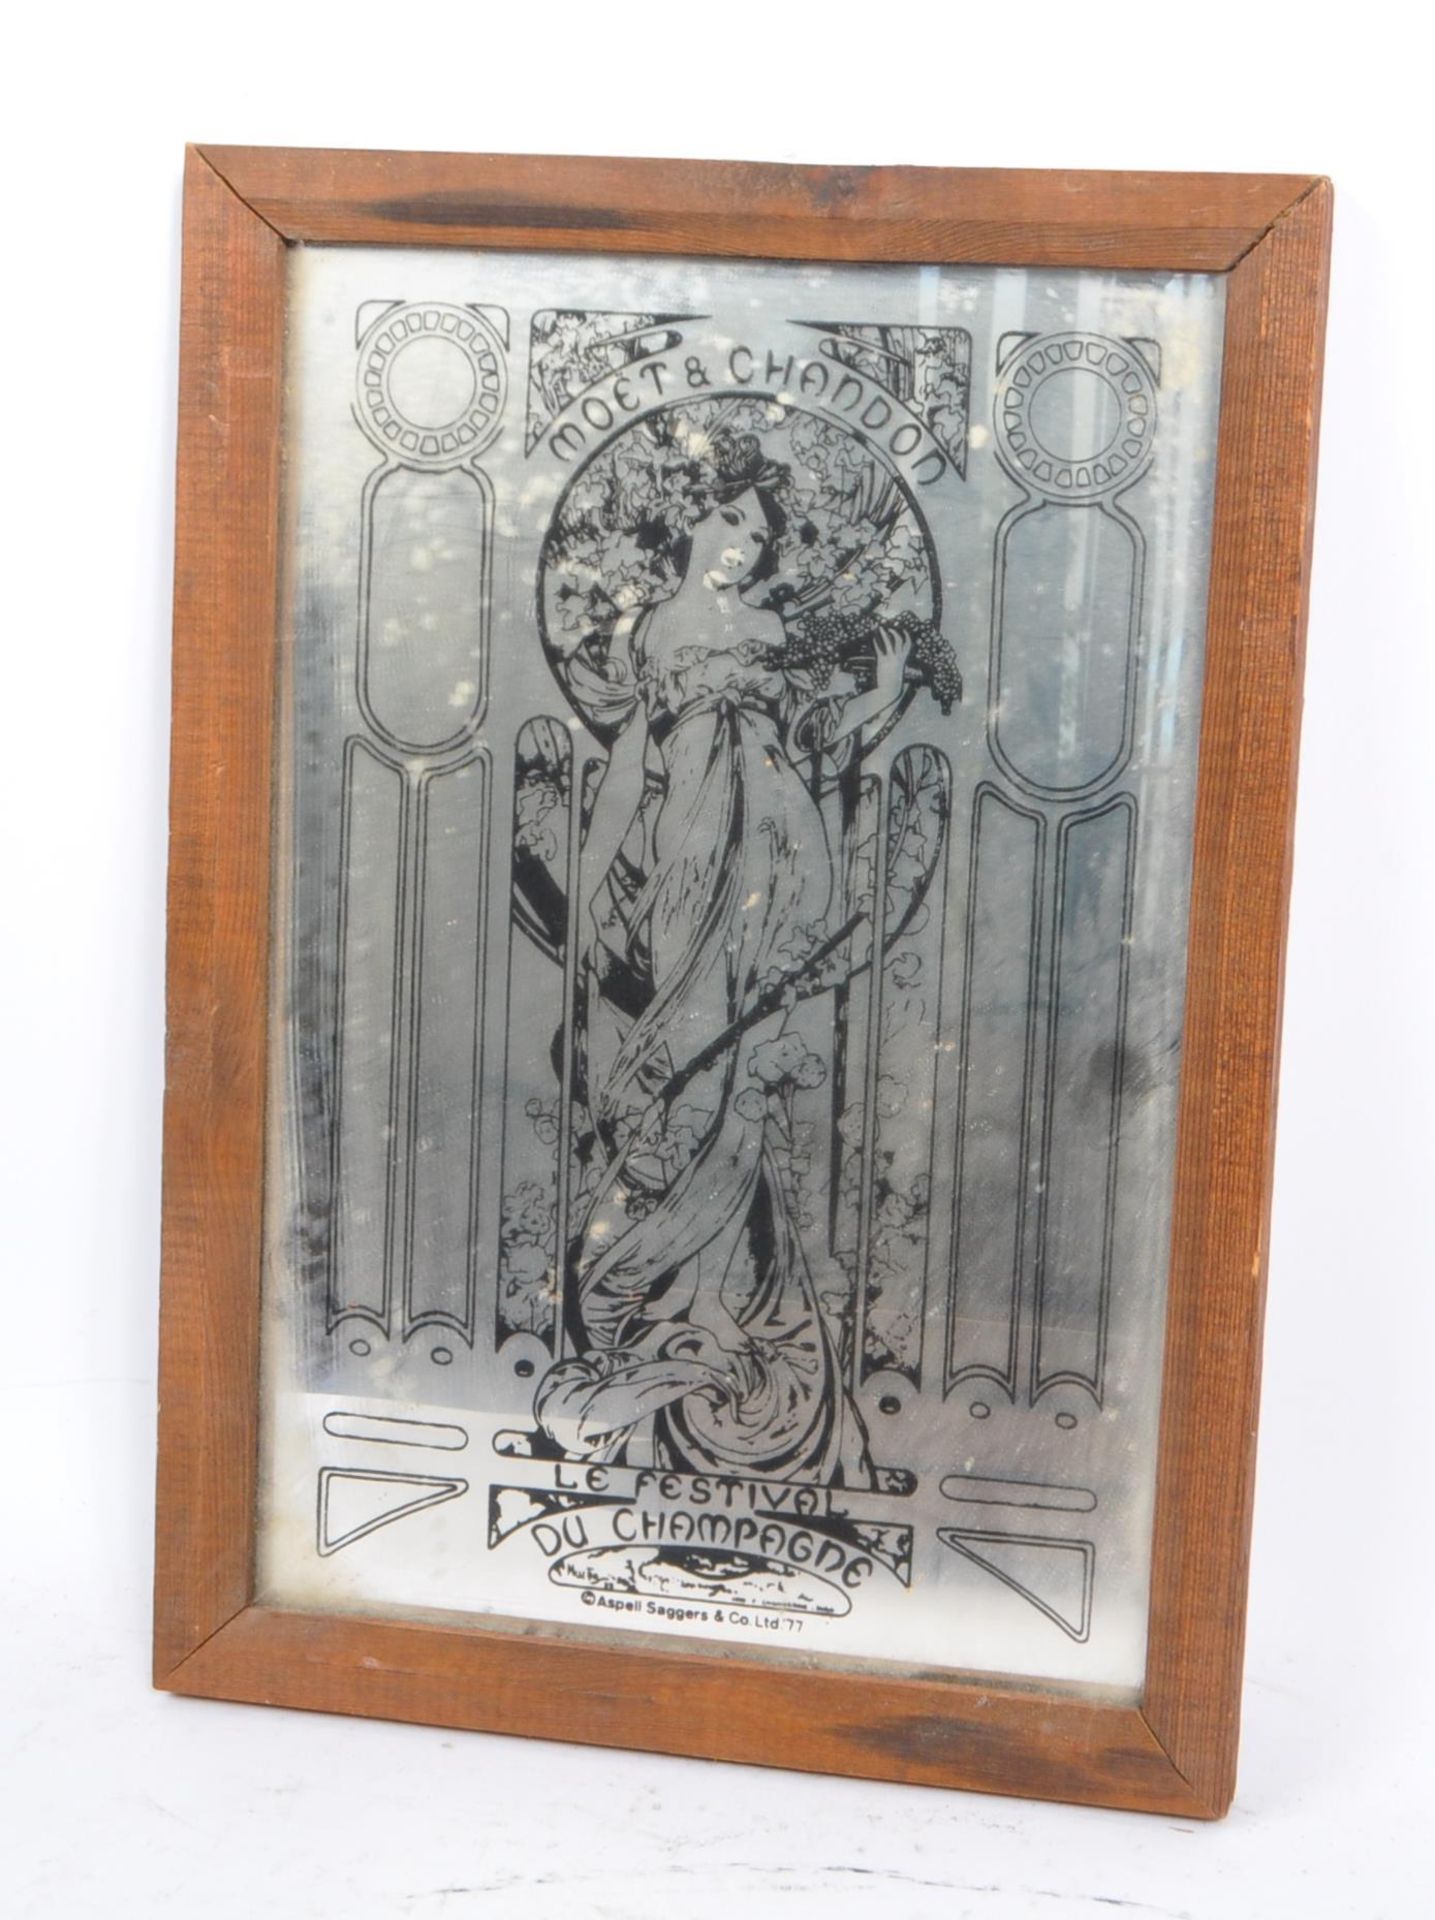 COLLECTION OF VINTAGE ALCOHOL PUB FRAMED MIRRORS - Image 6 of 7